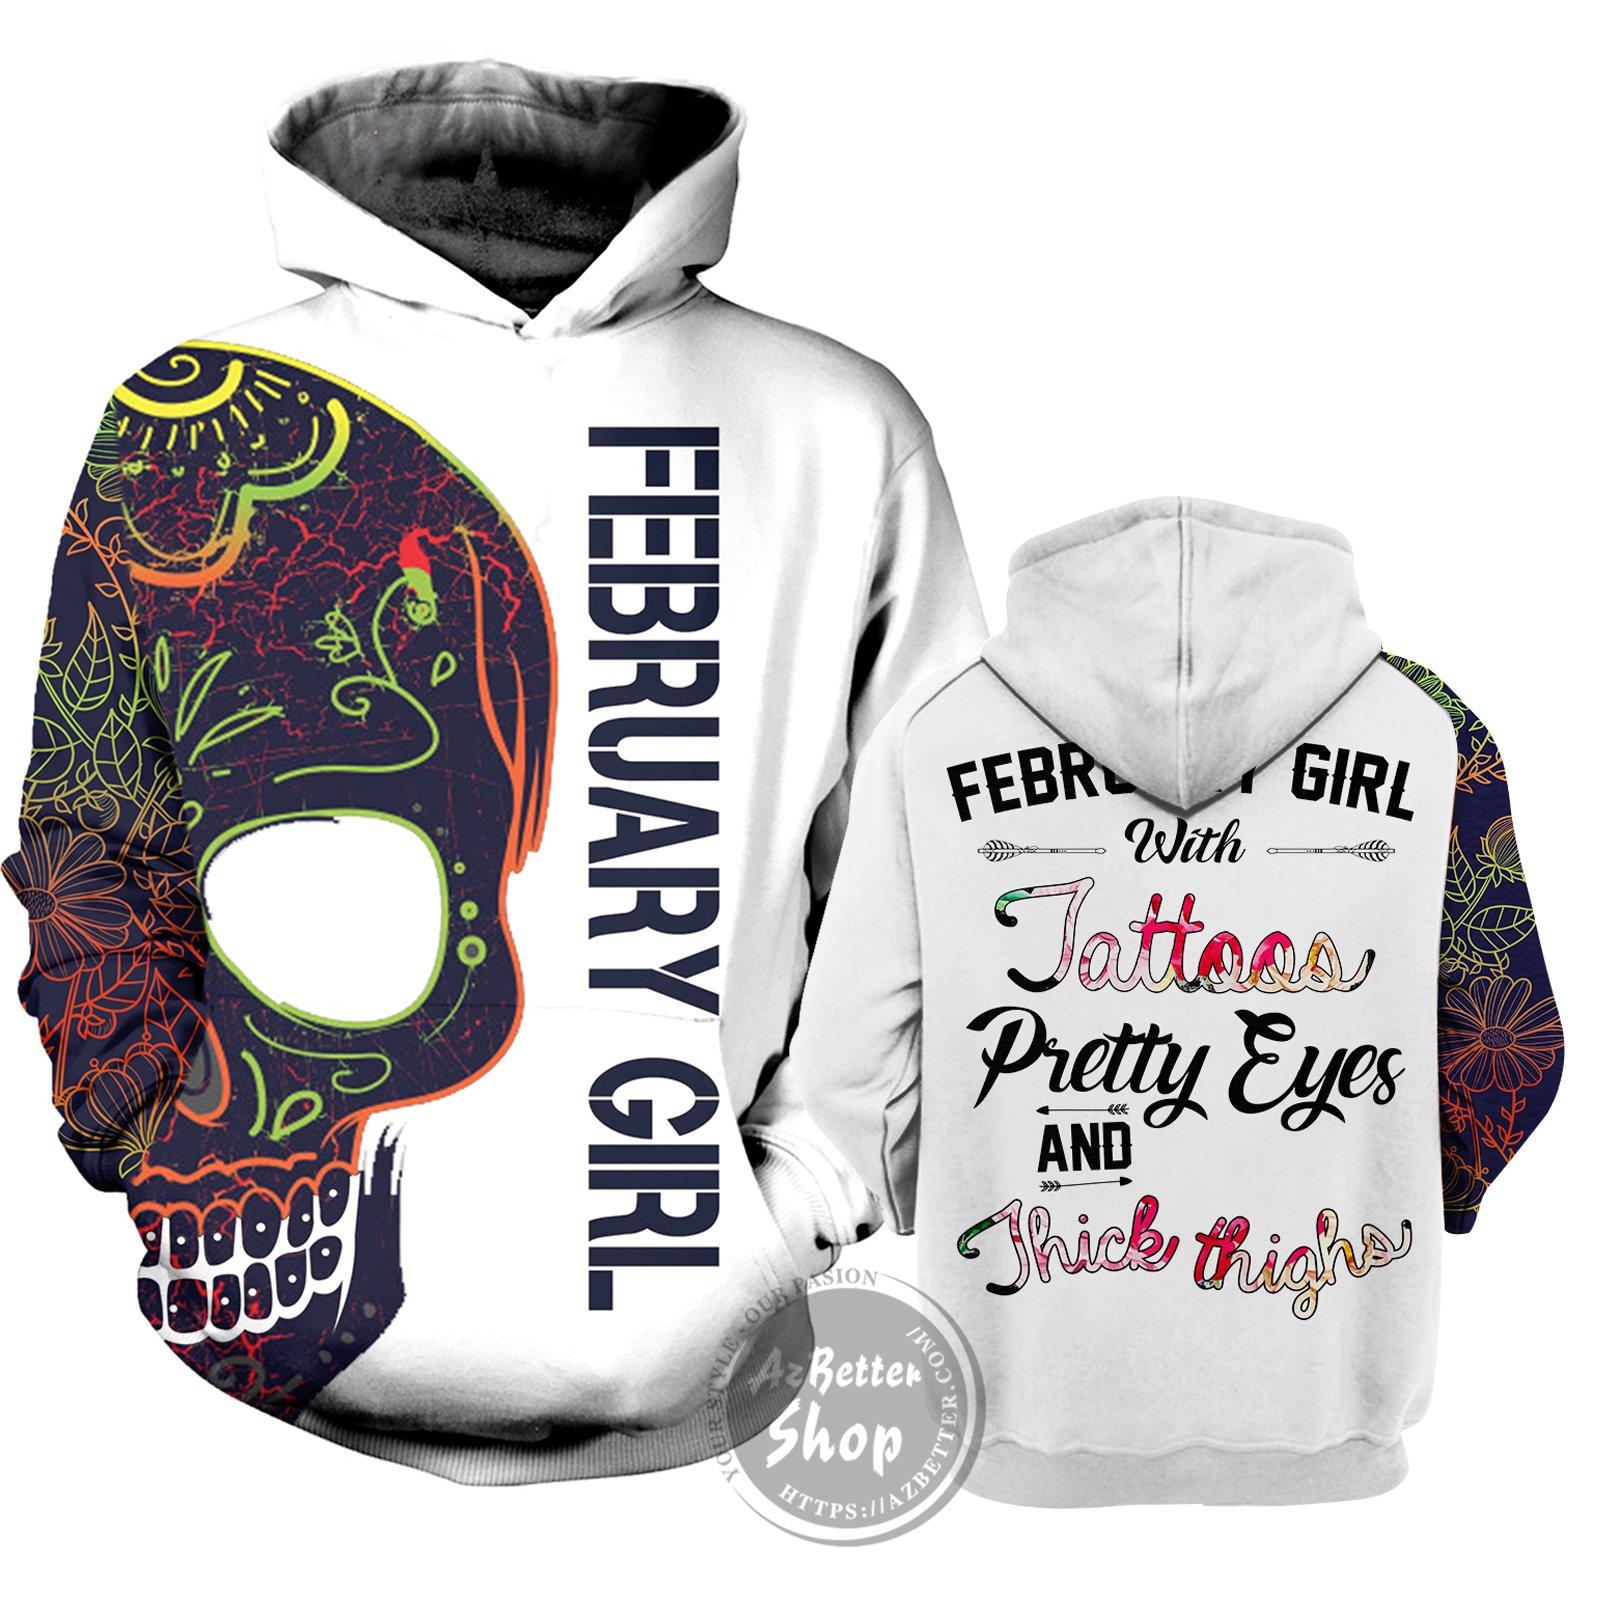 February girl with tatoos pretty eyes and thick thighs 3d hoodie 1